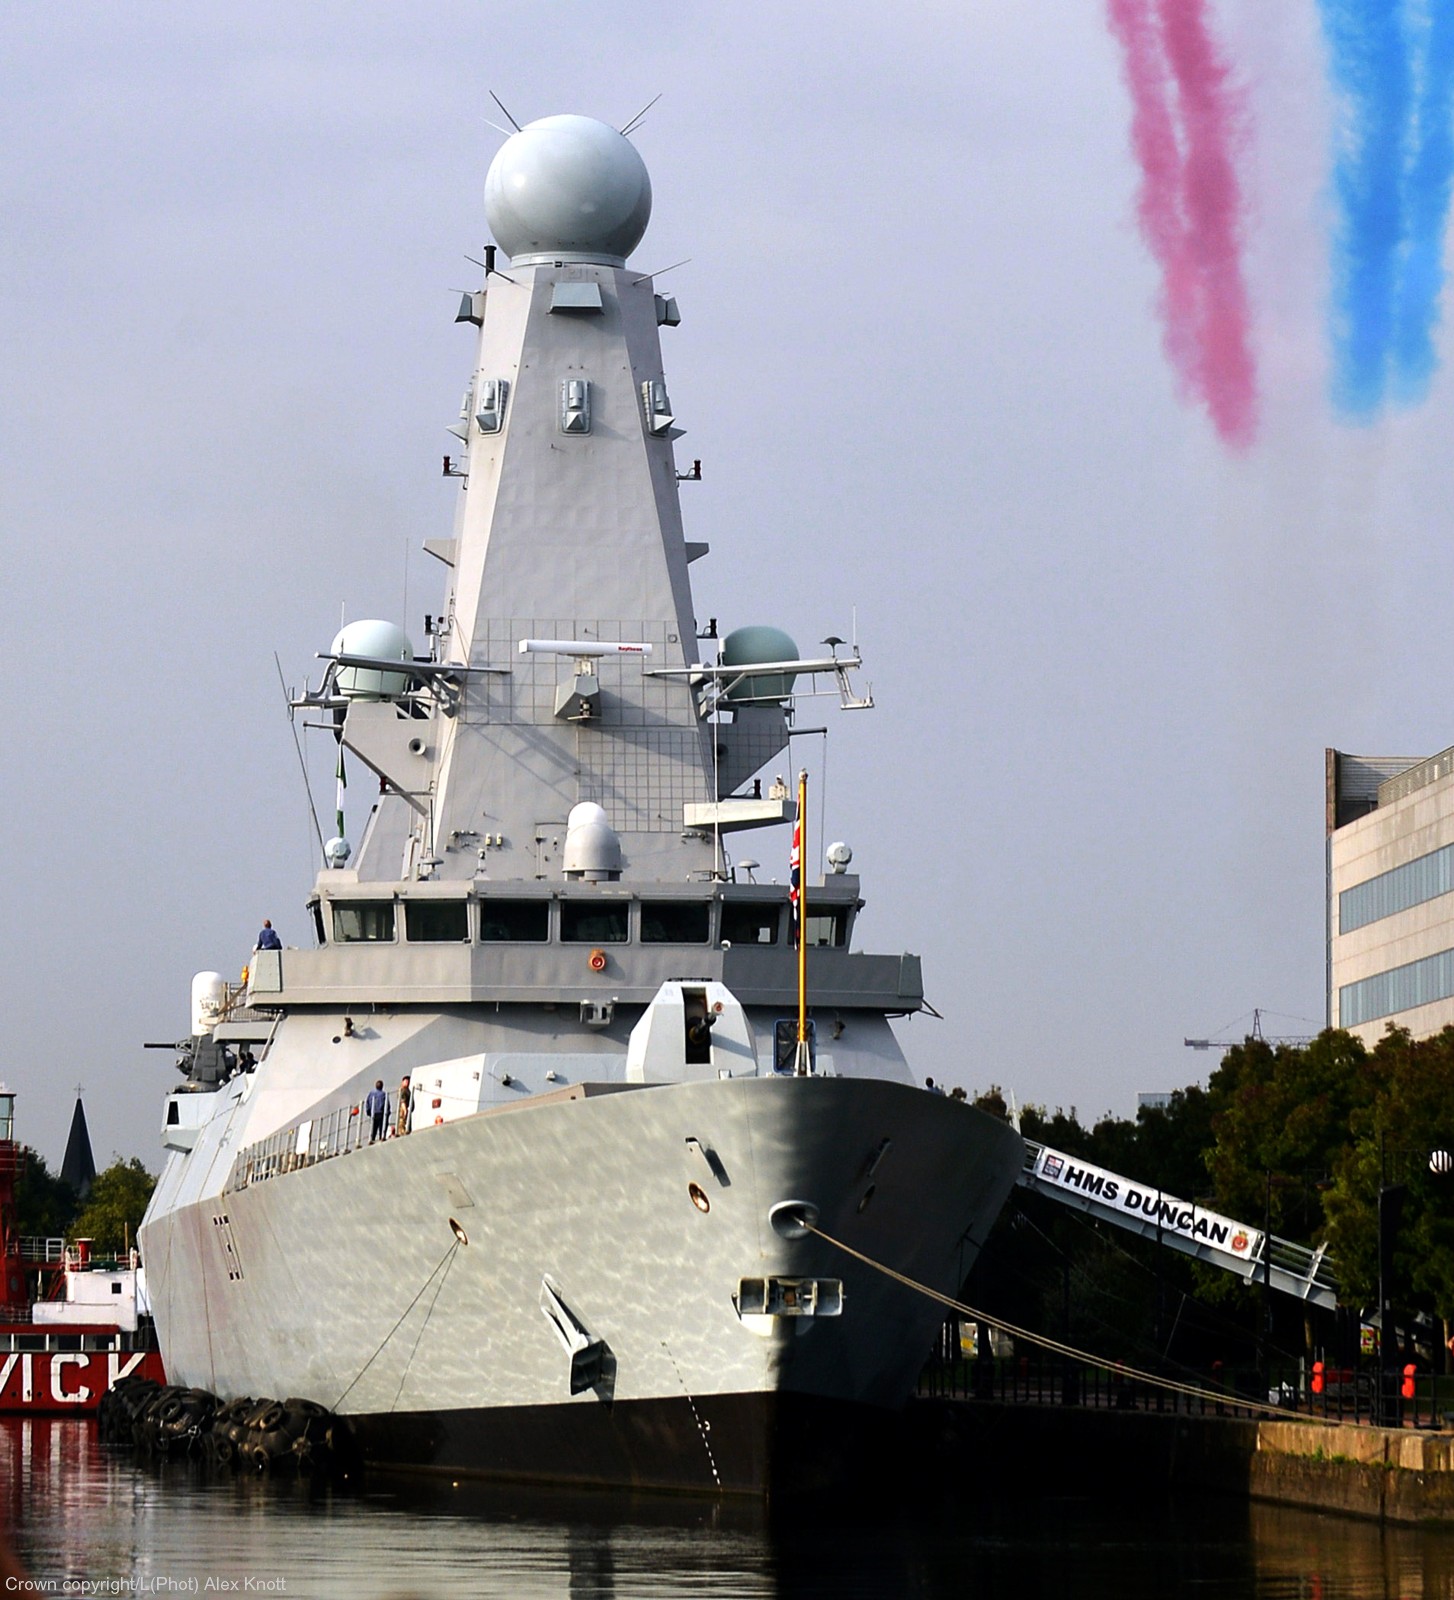 hms duncan d-37 type 45 daring class guided missile destroyer ddg royal navy sea viper paams 03 commissioning